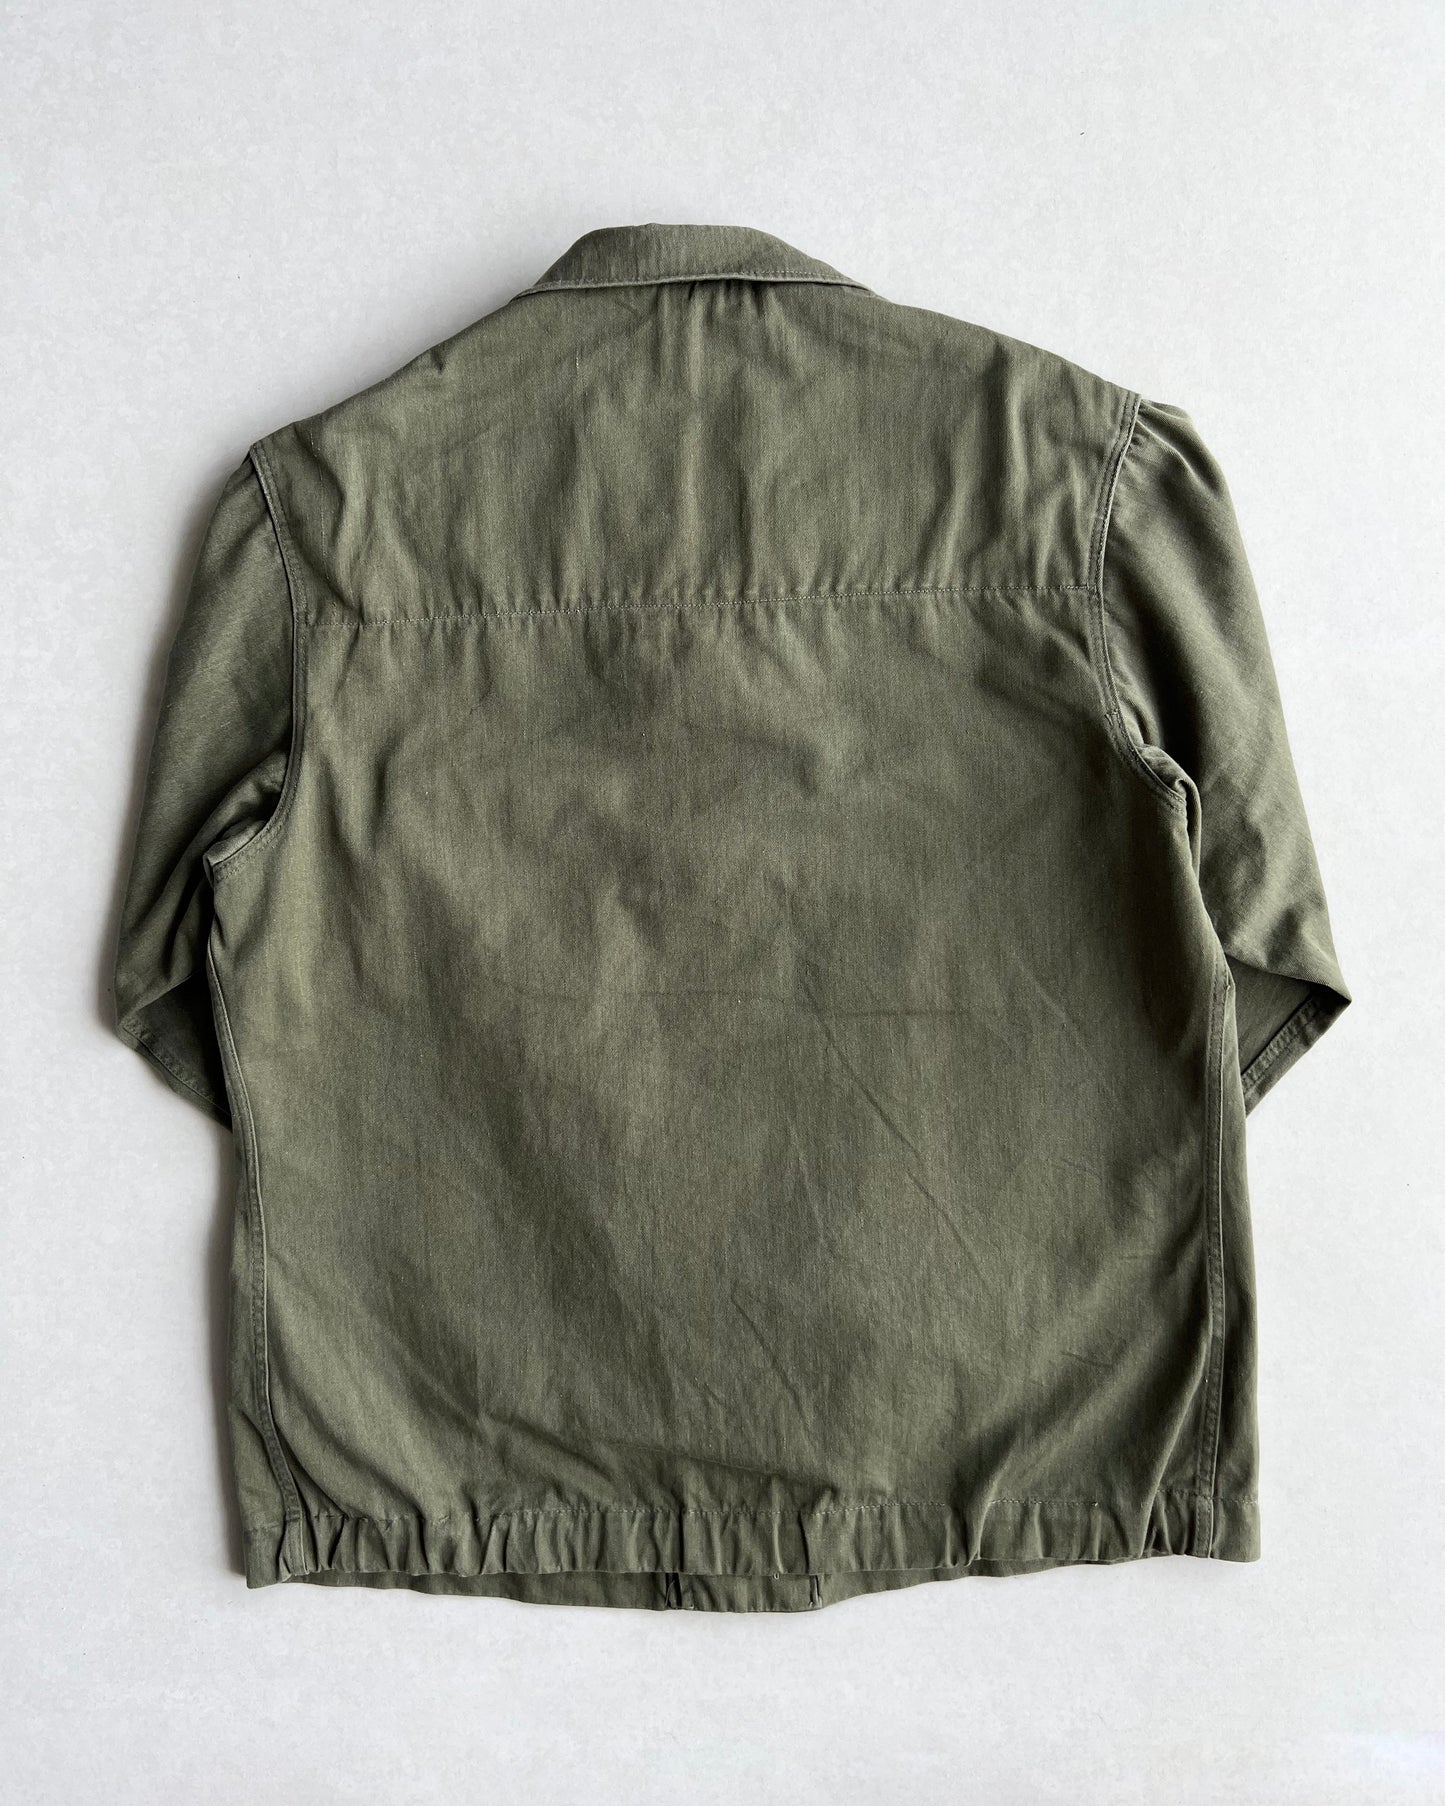 1970S OLIVE EAST GERMAN ARMY SHIRT (M/L)